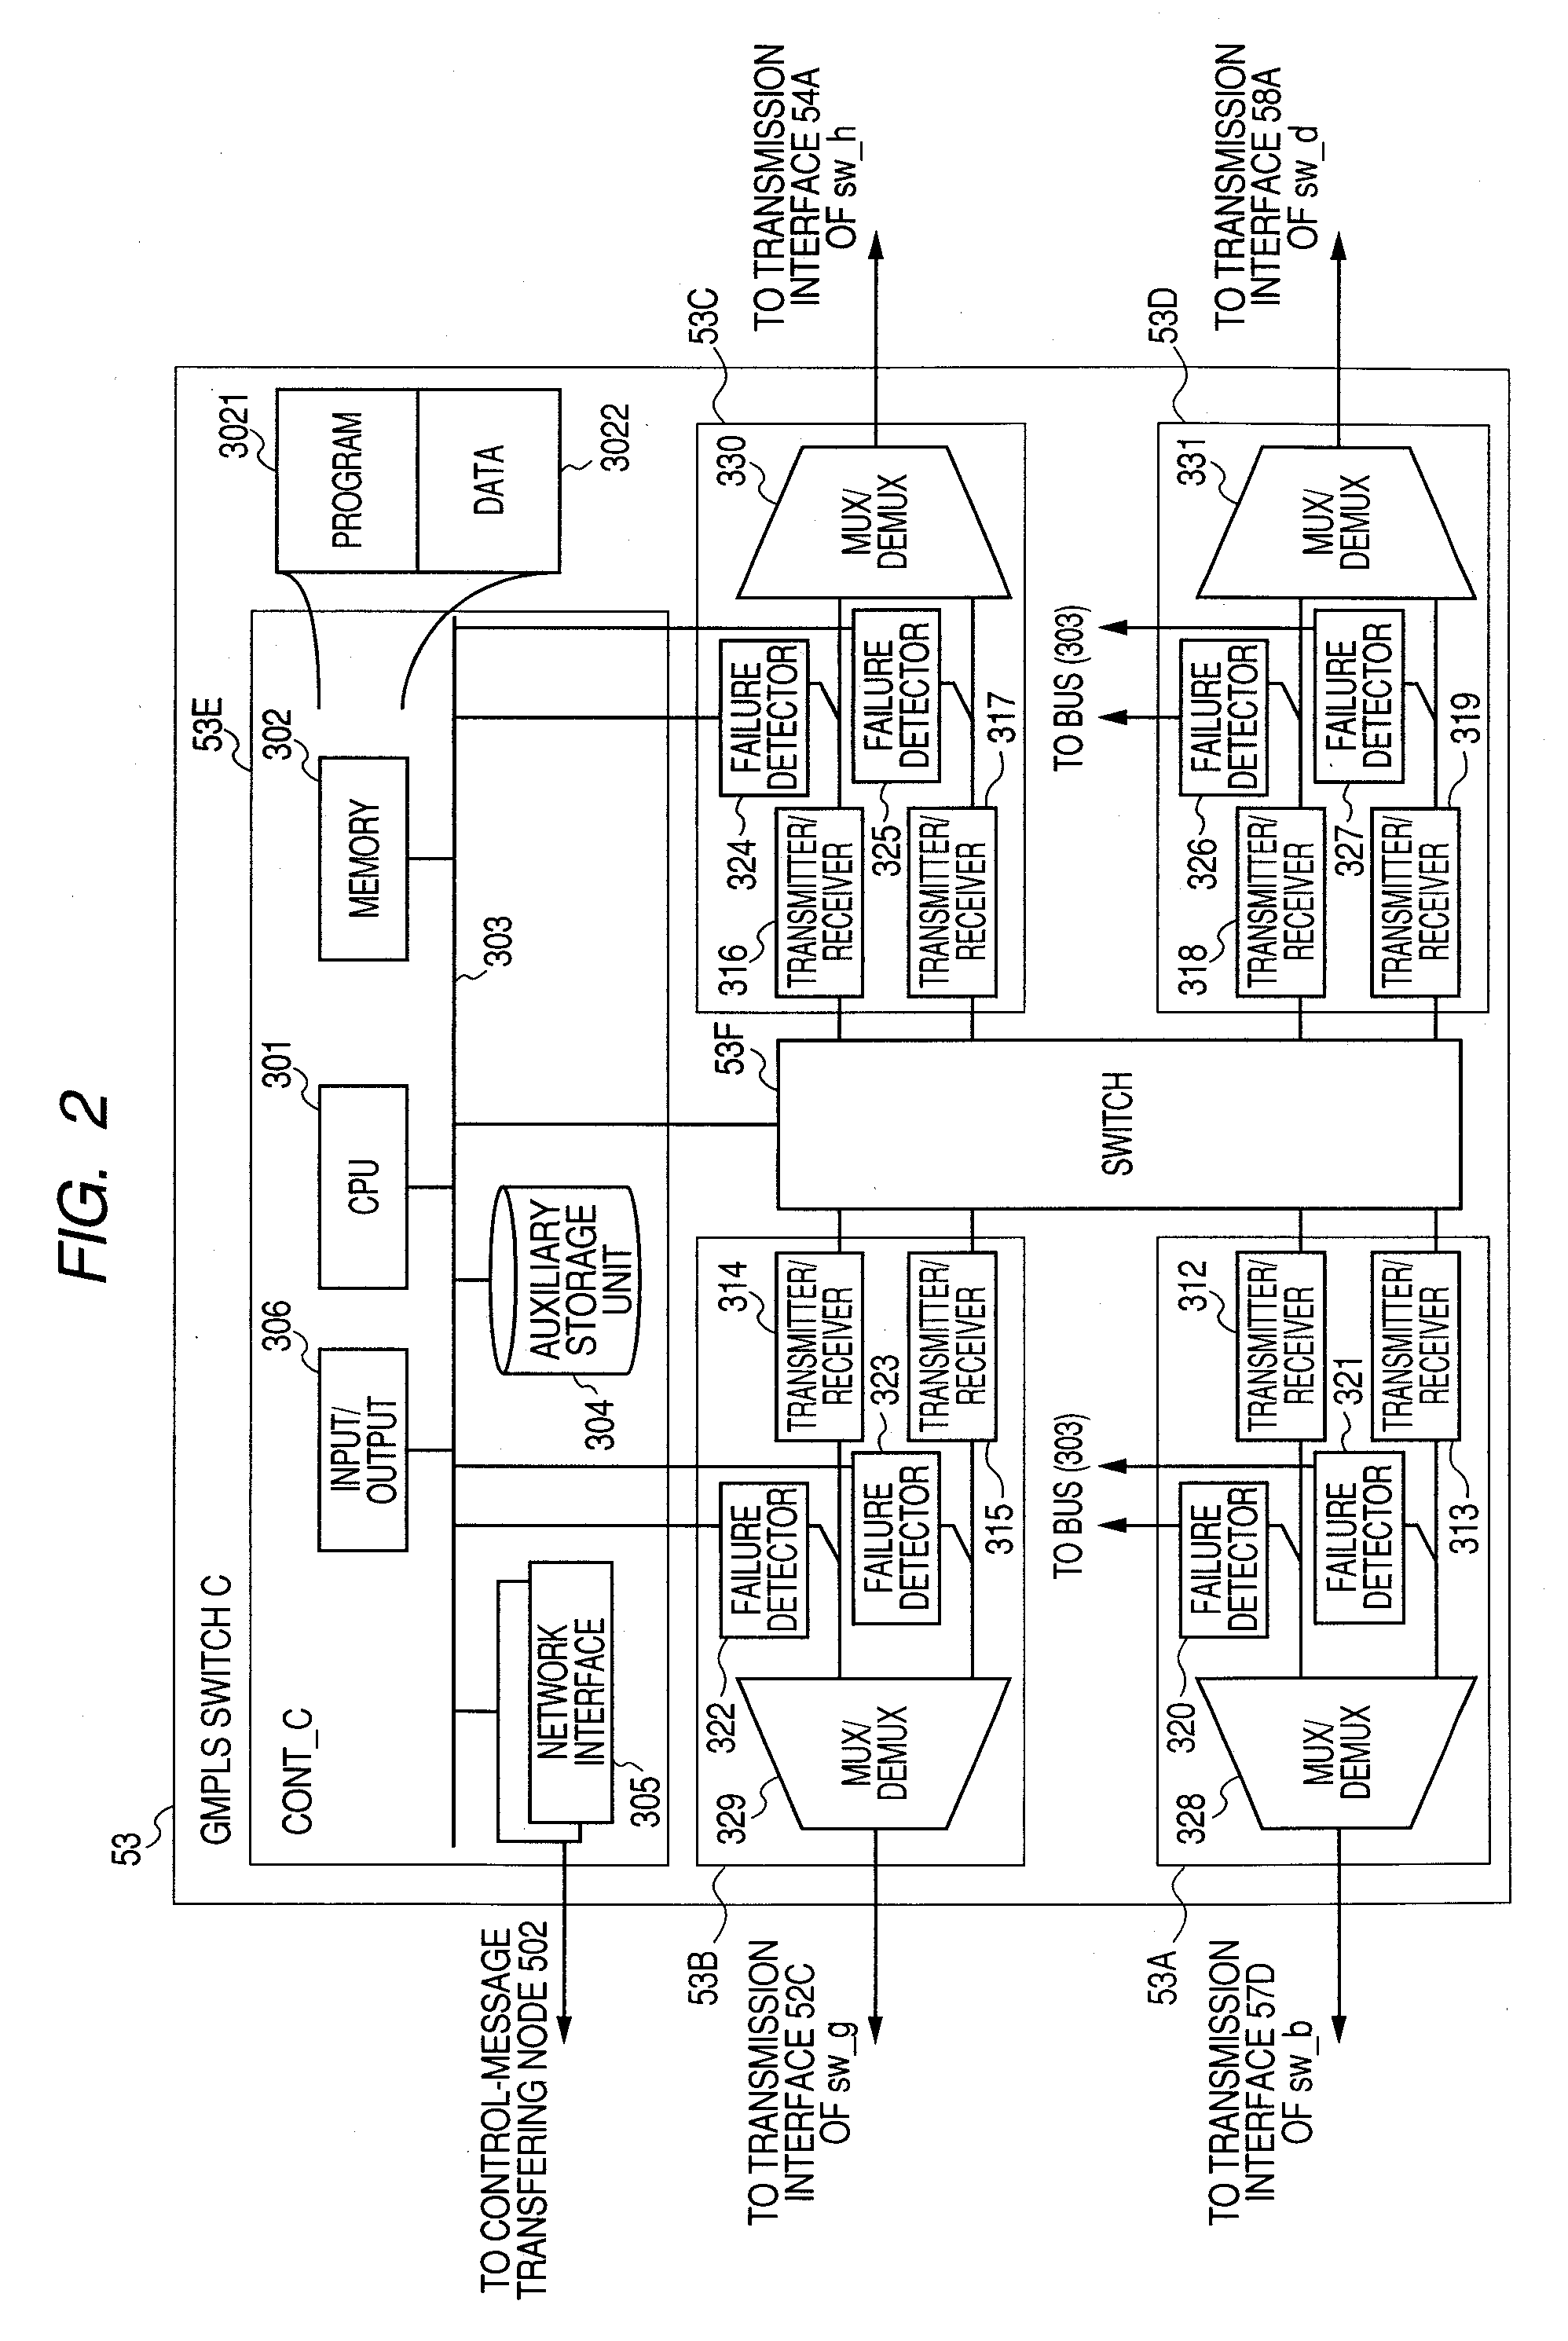 Routing failure recovery mechanism for network systems